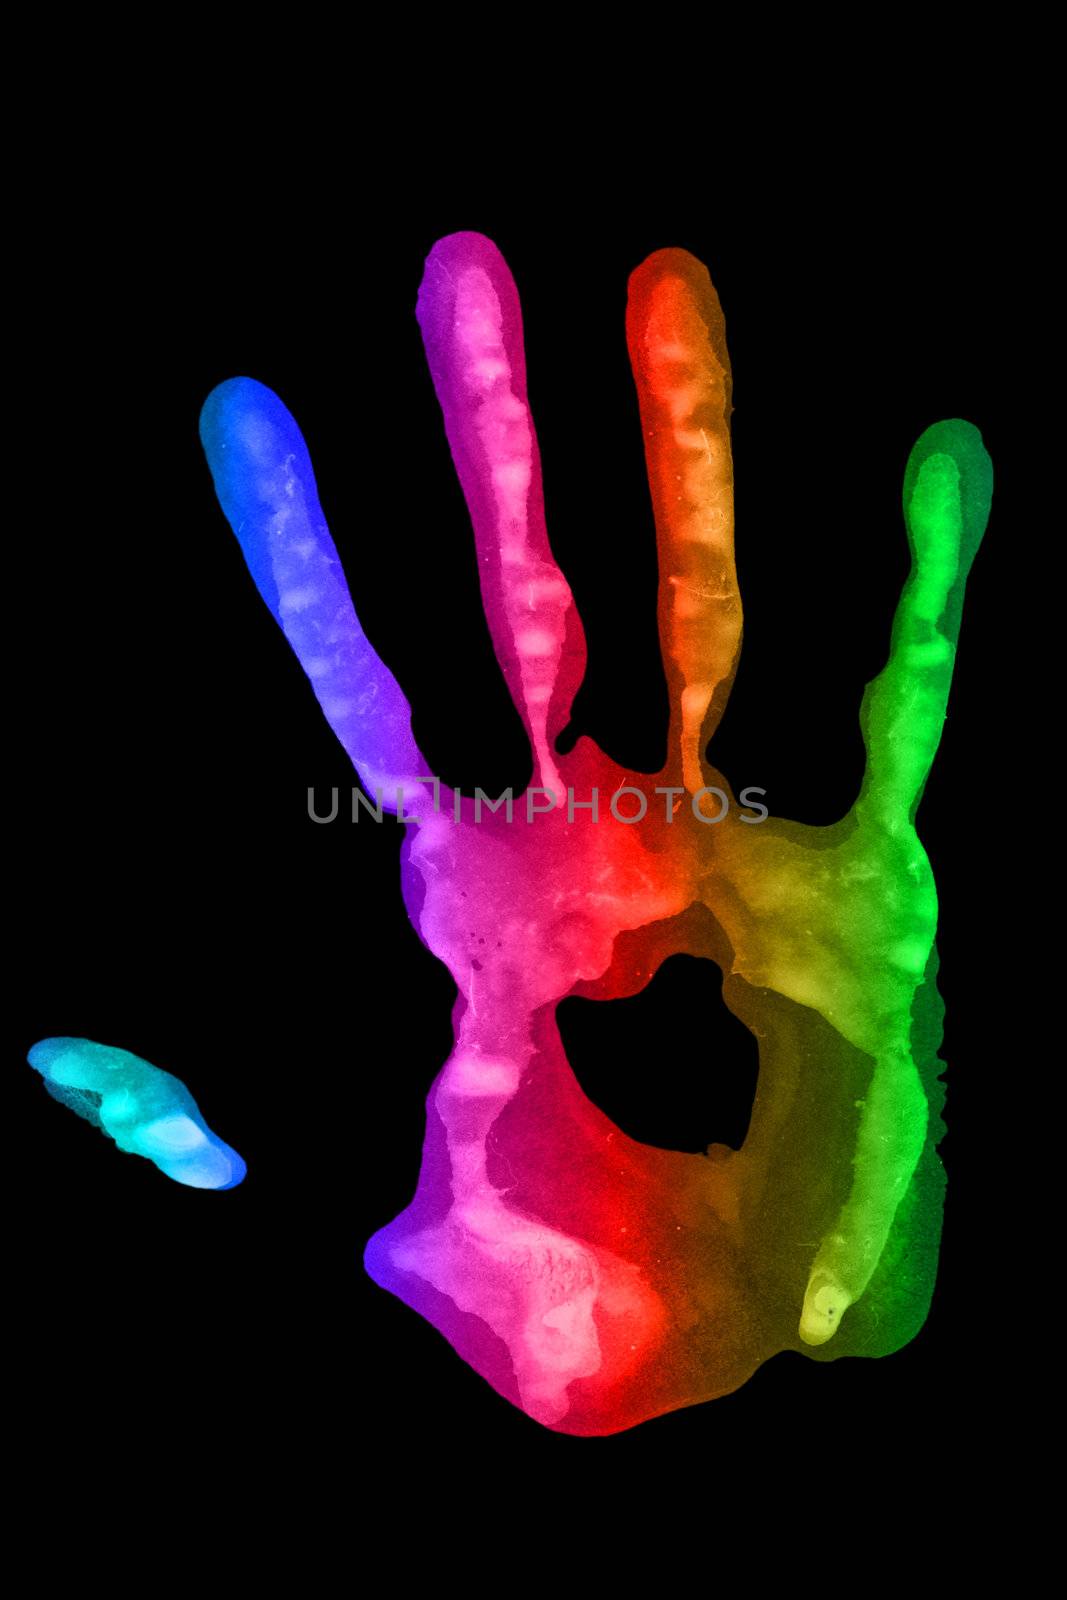 imprint of the hands of bright colors